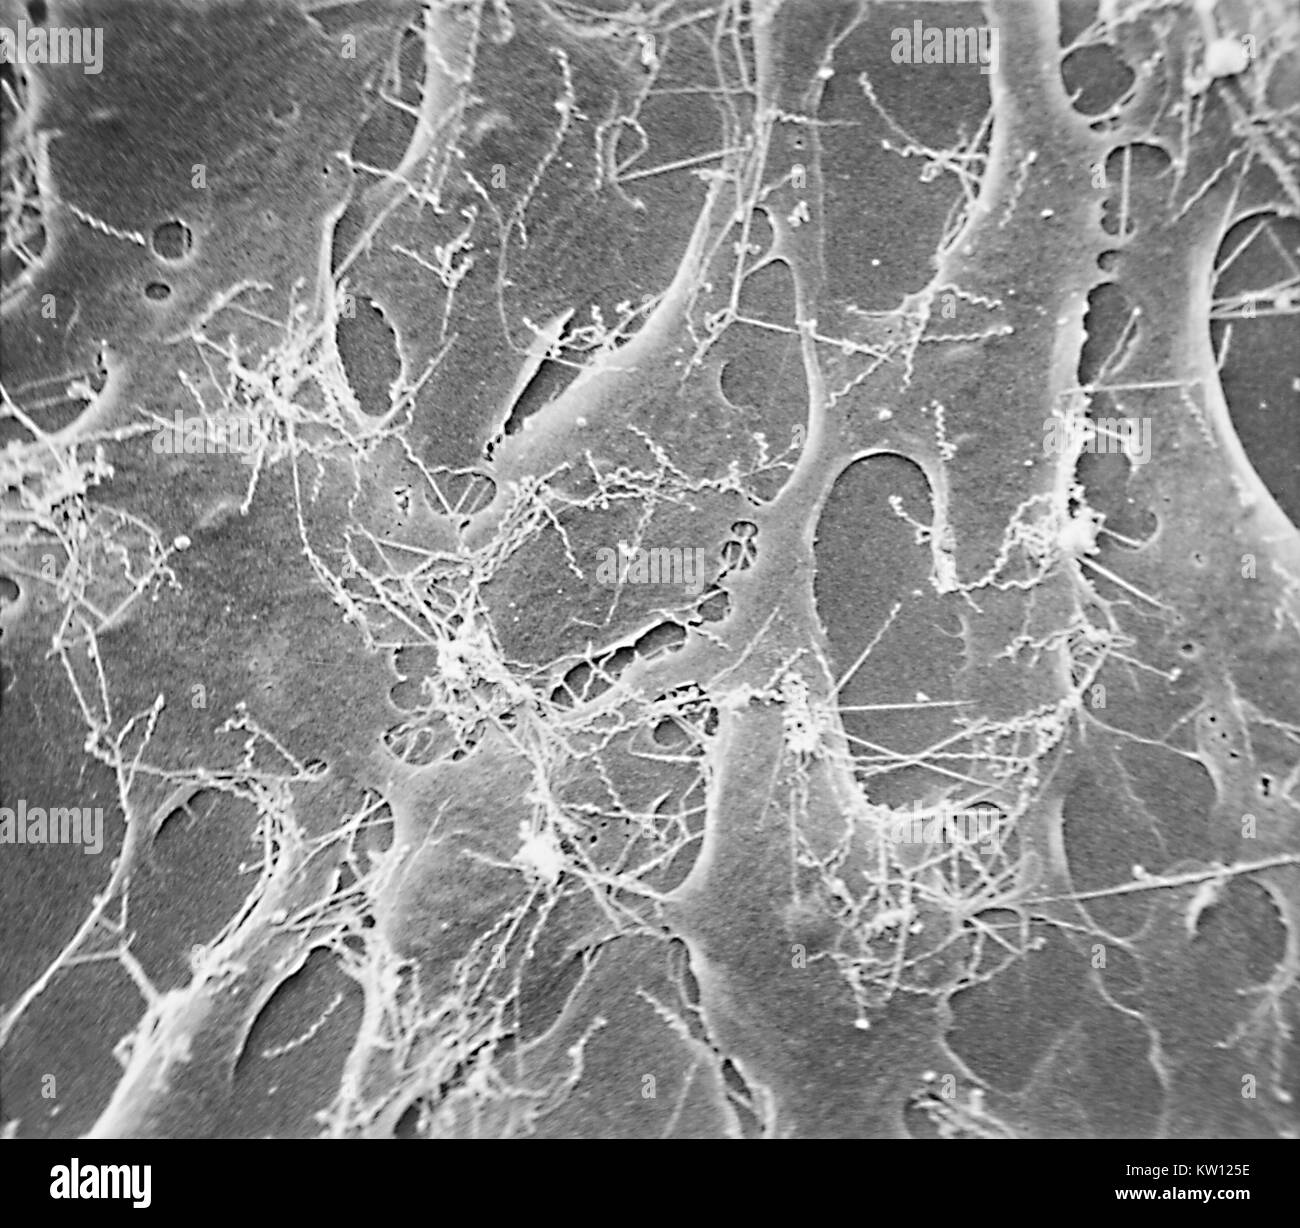 Electron micrograph of Treponema pallidum on cultures of cotton-tail rabbit epithelium cells (Sf1Ep). Treponema pallidum is the causative agent of syphilis. In the United States, over 35, 600 cases of syphilis were reported by health officials in 1999. Image courtesy CDC/Dr. David Cox, 1980. Stock Photo